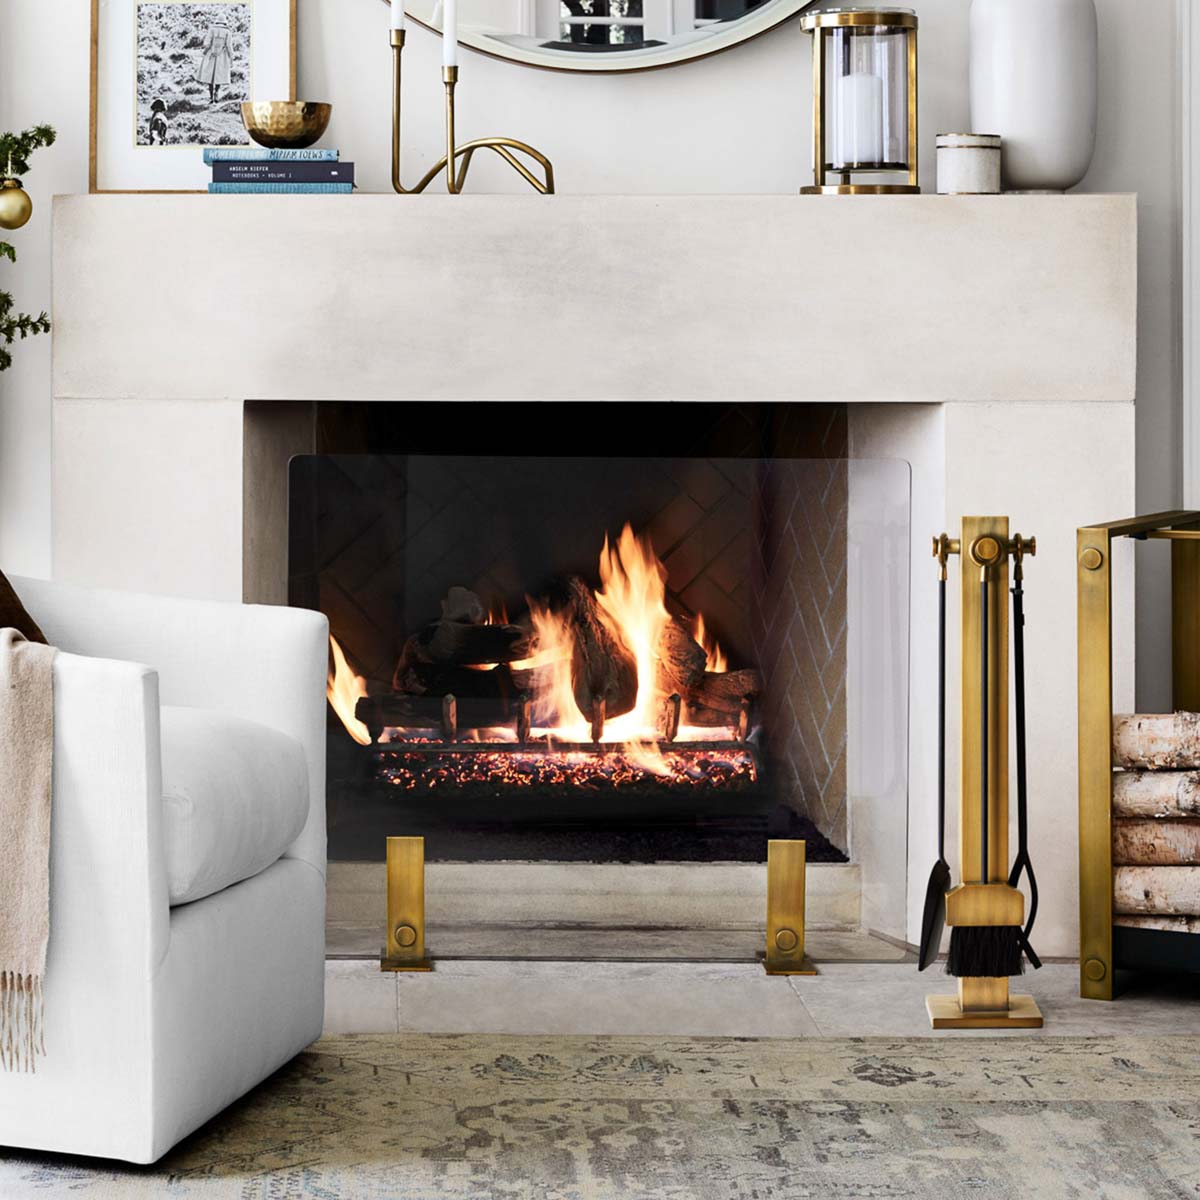 Fireplace with modern fireplace tool set